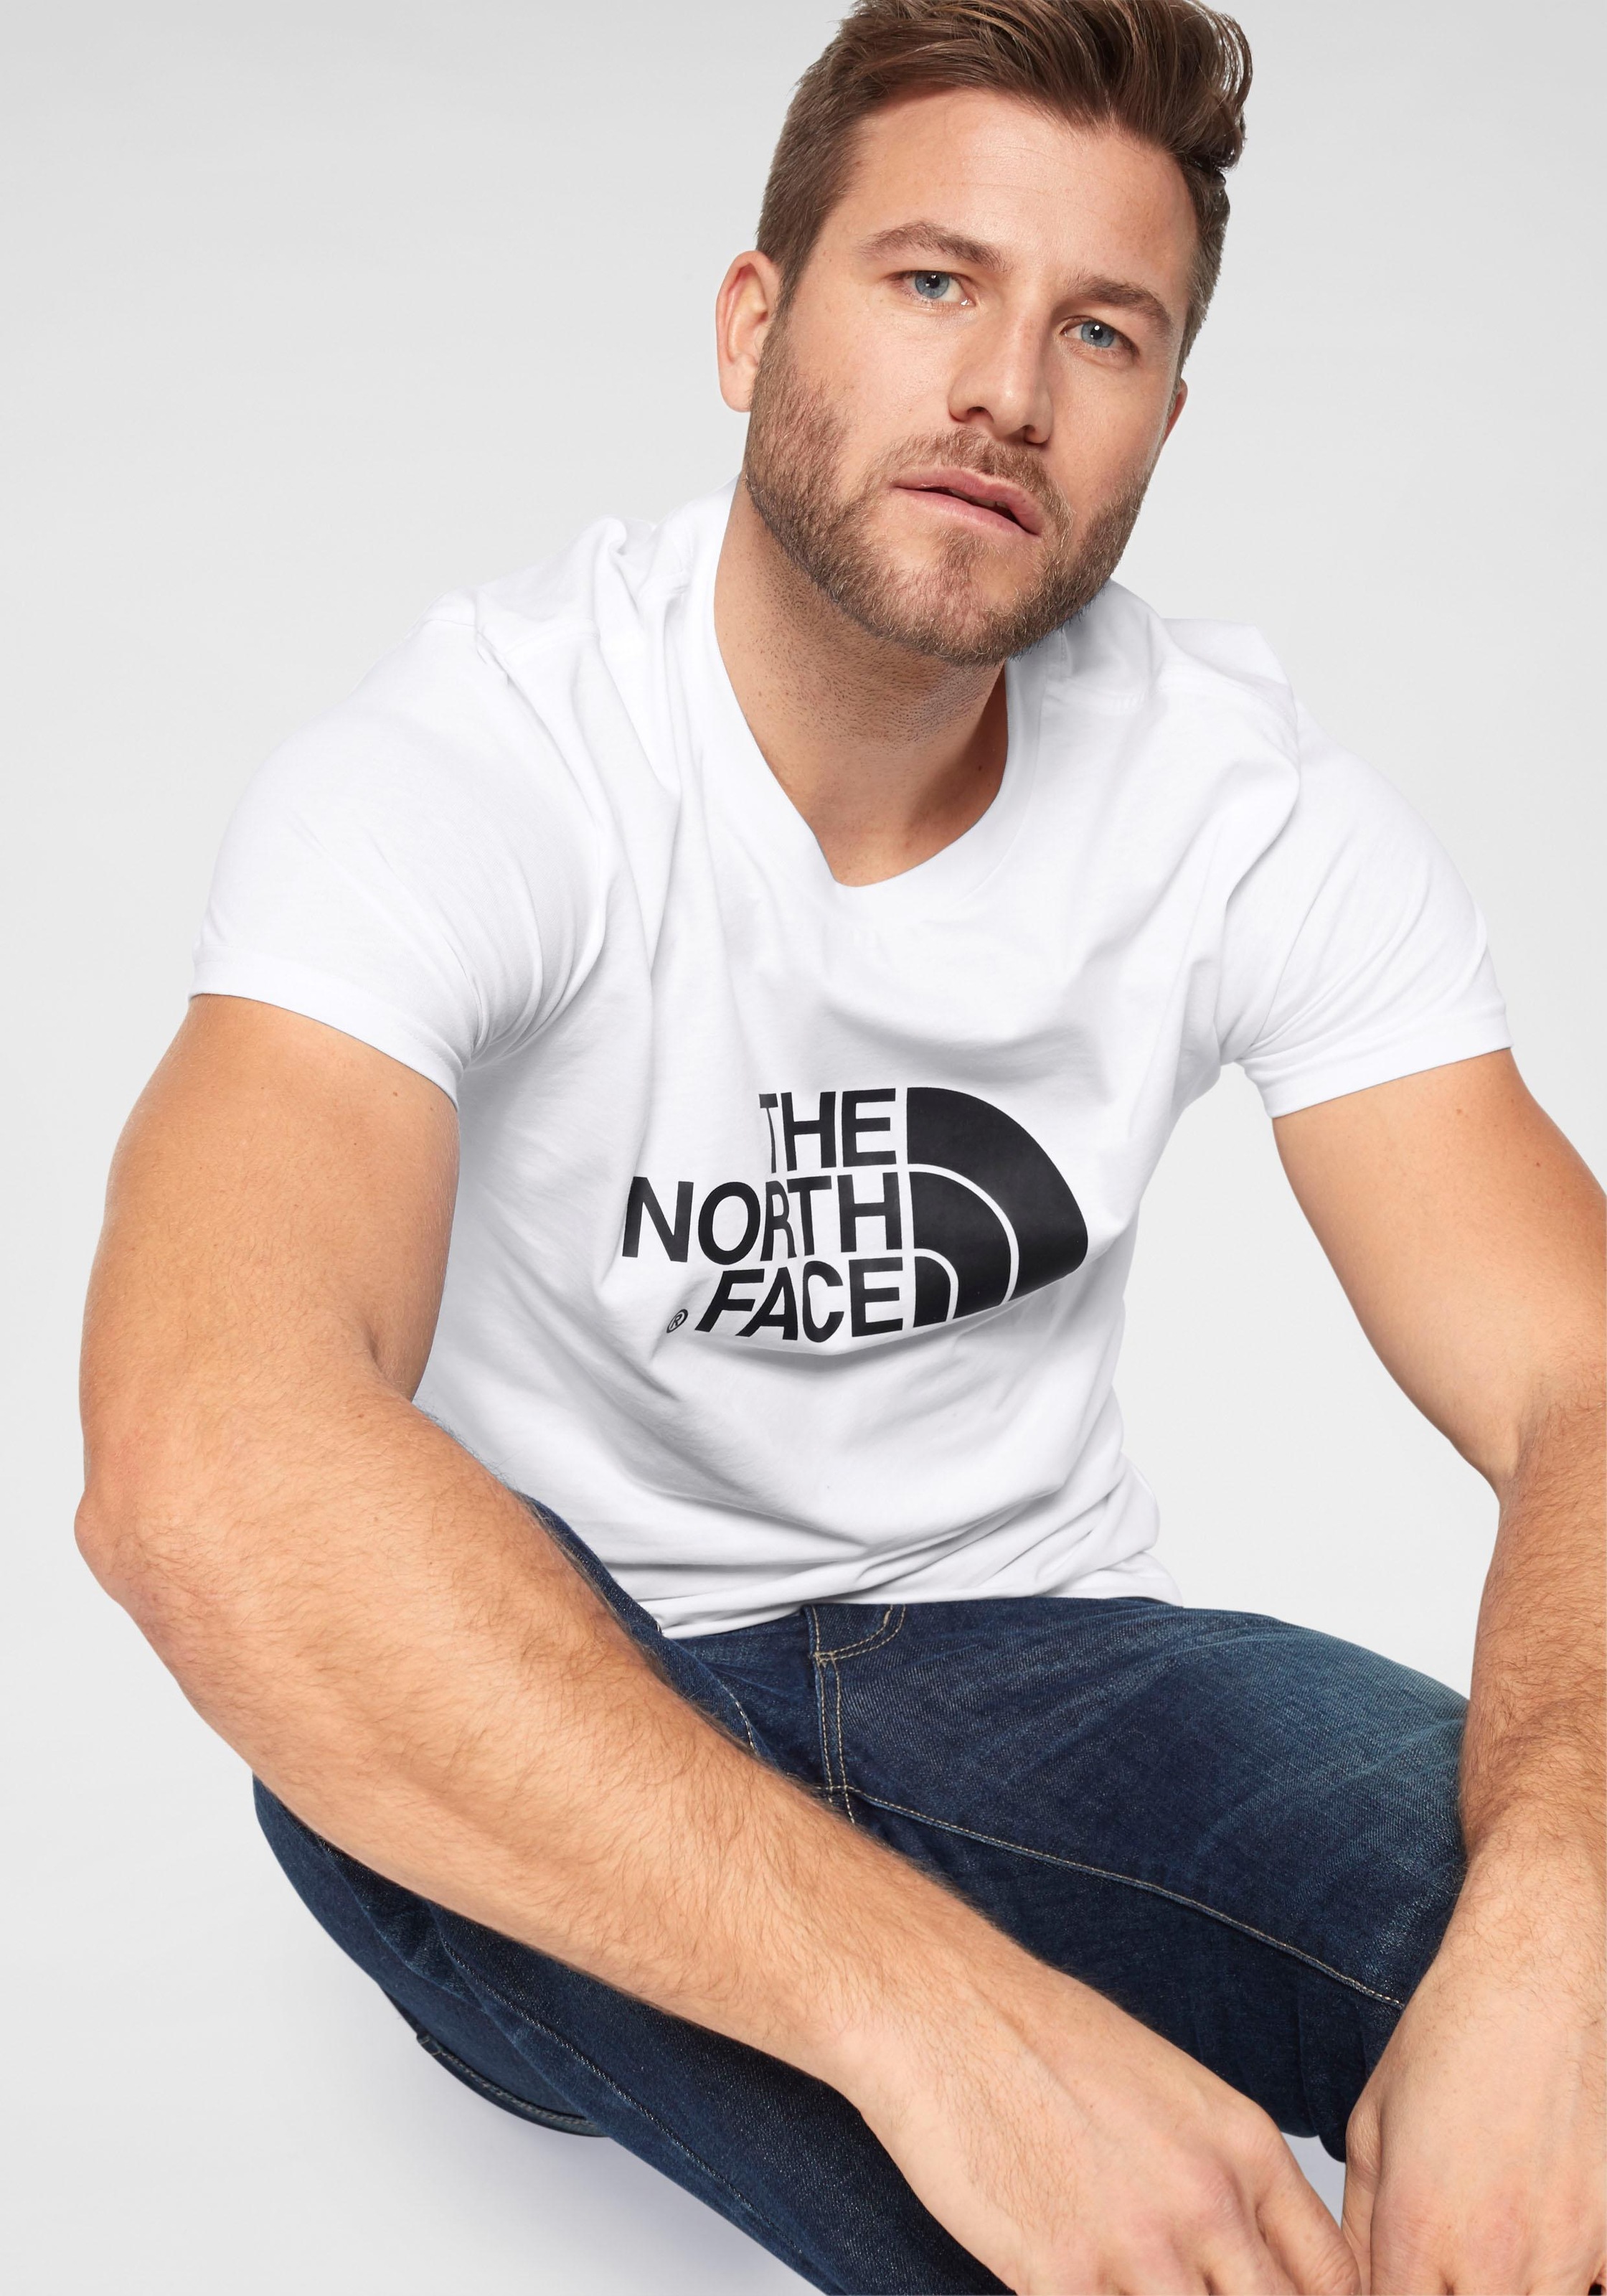 The North Face T-Shirt »EASY Logo-Print Großer kaufen online bei TEE«, OTTO